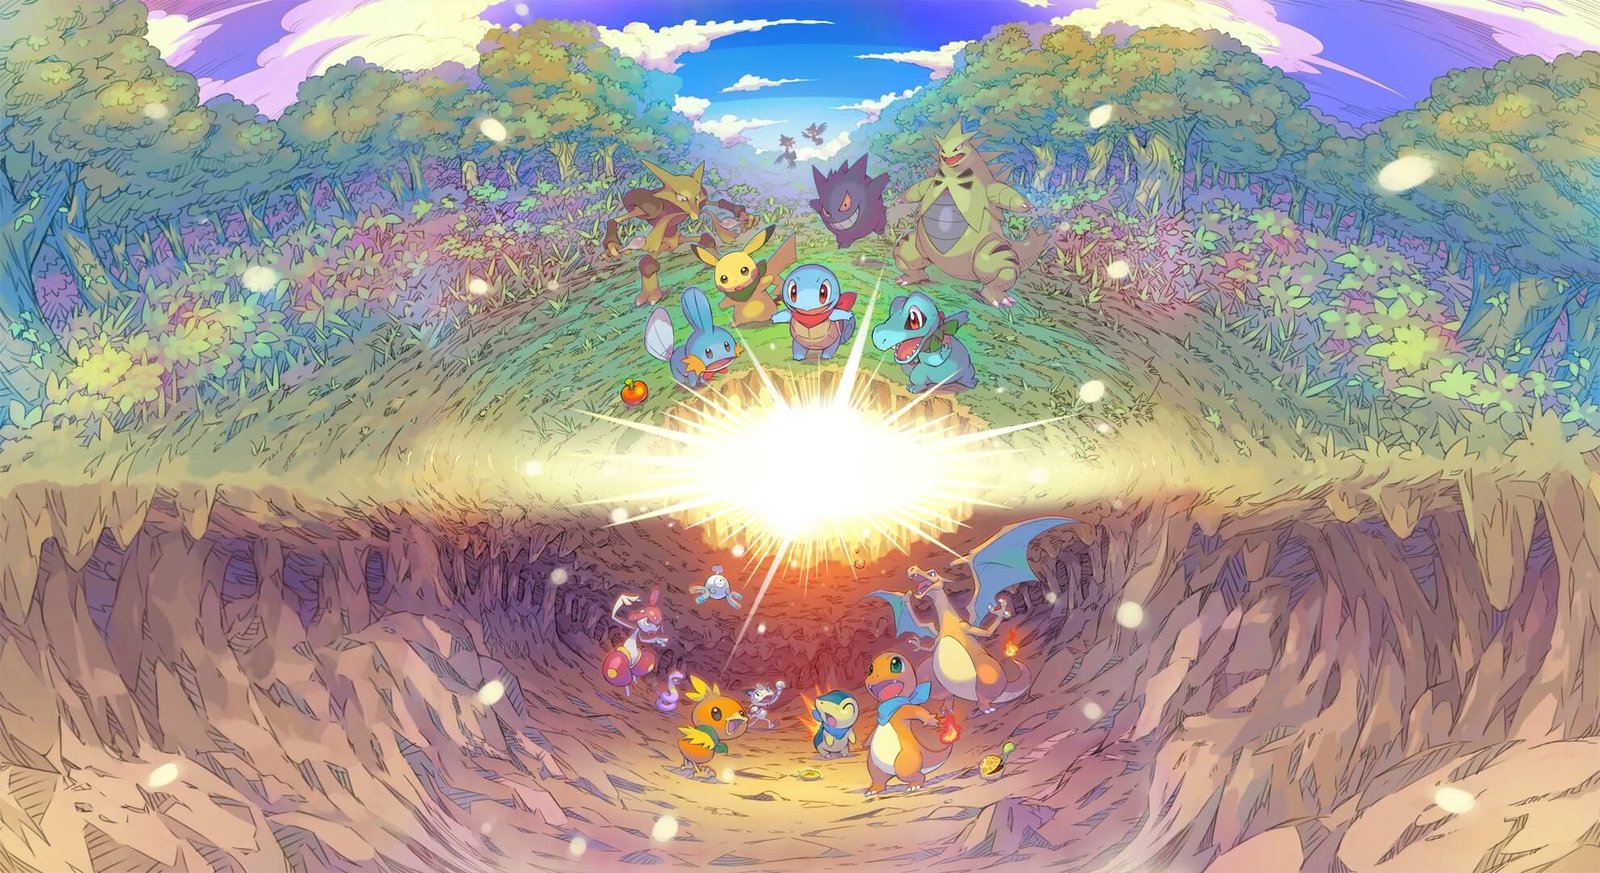 Review – Pokémon Mystery Dungeon: Rescue Team DX